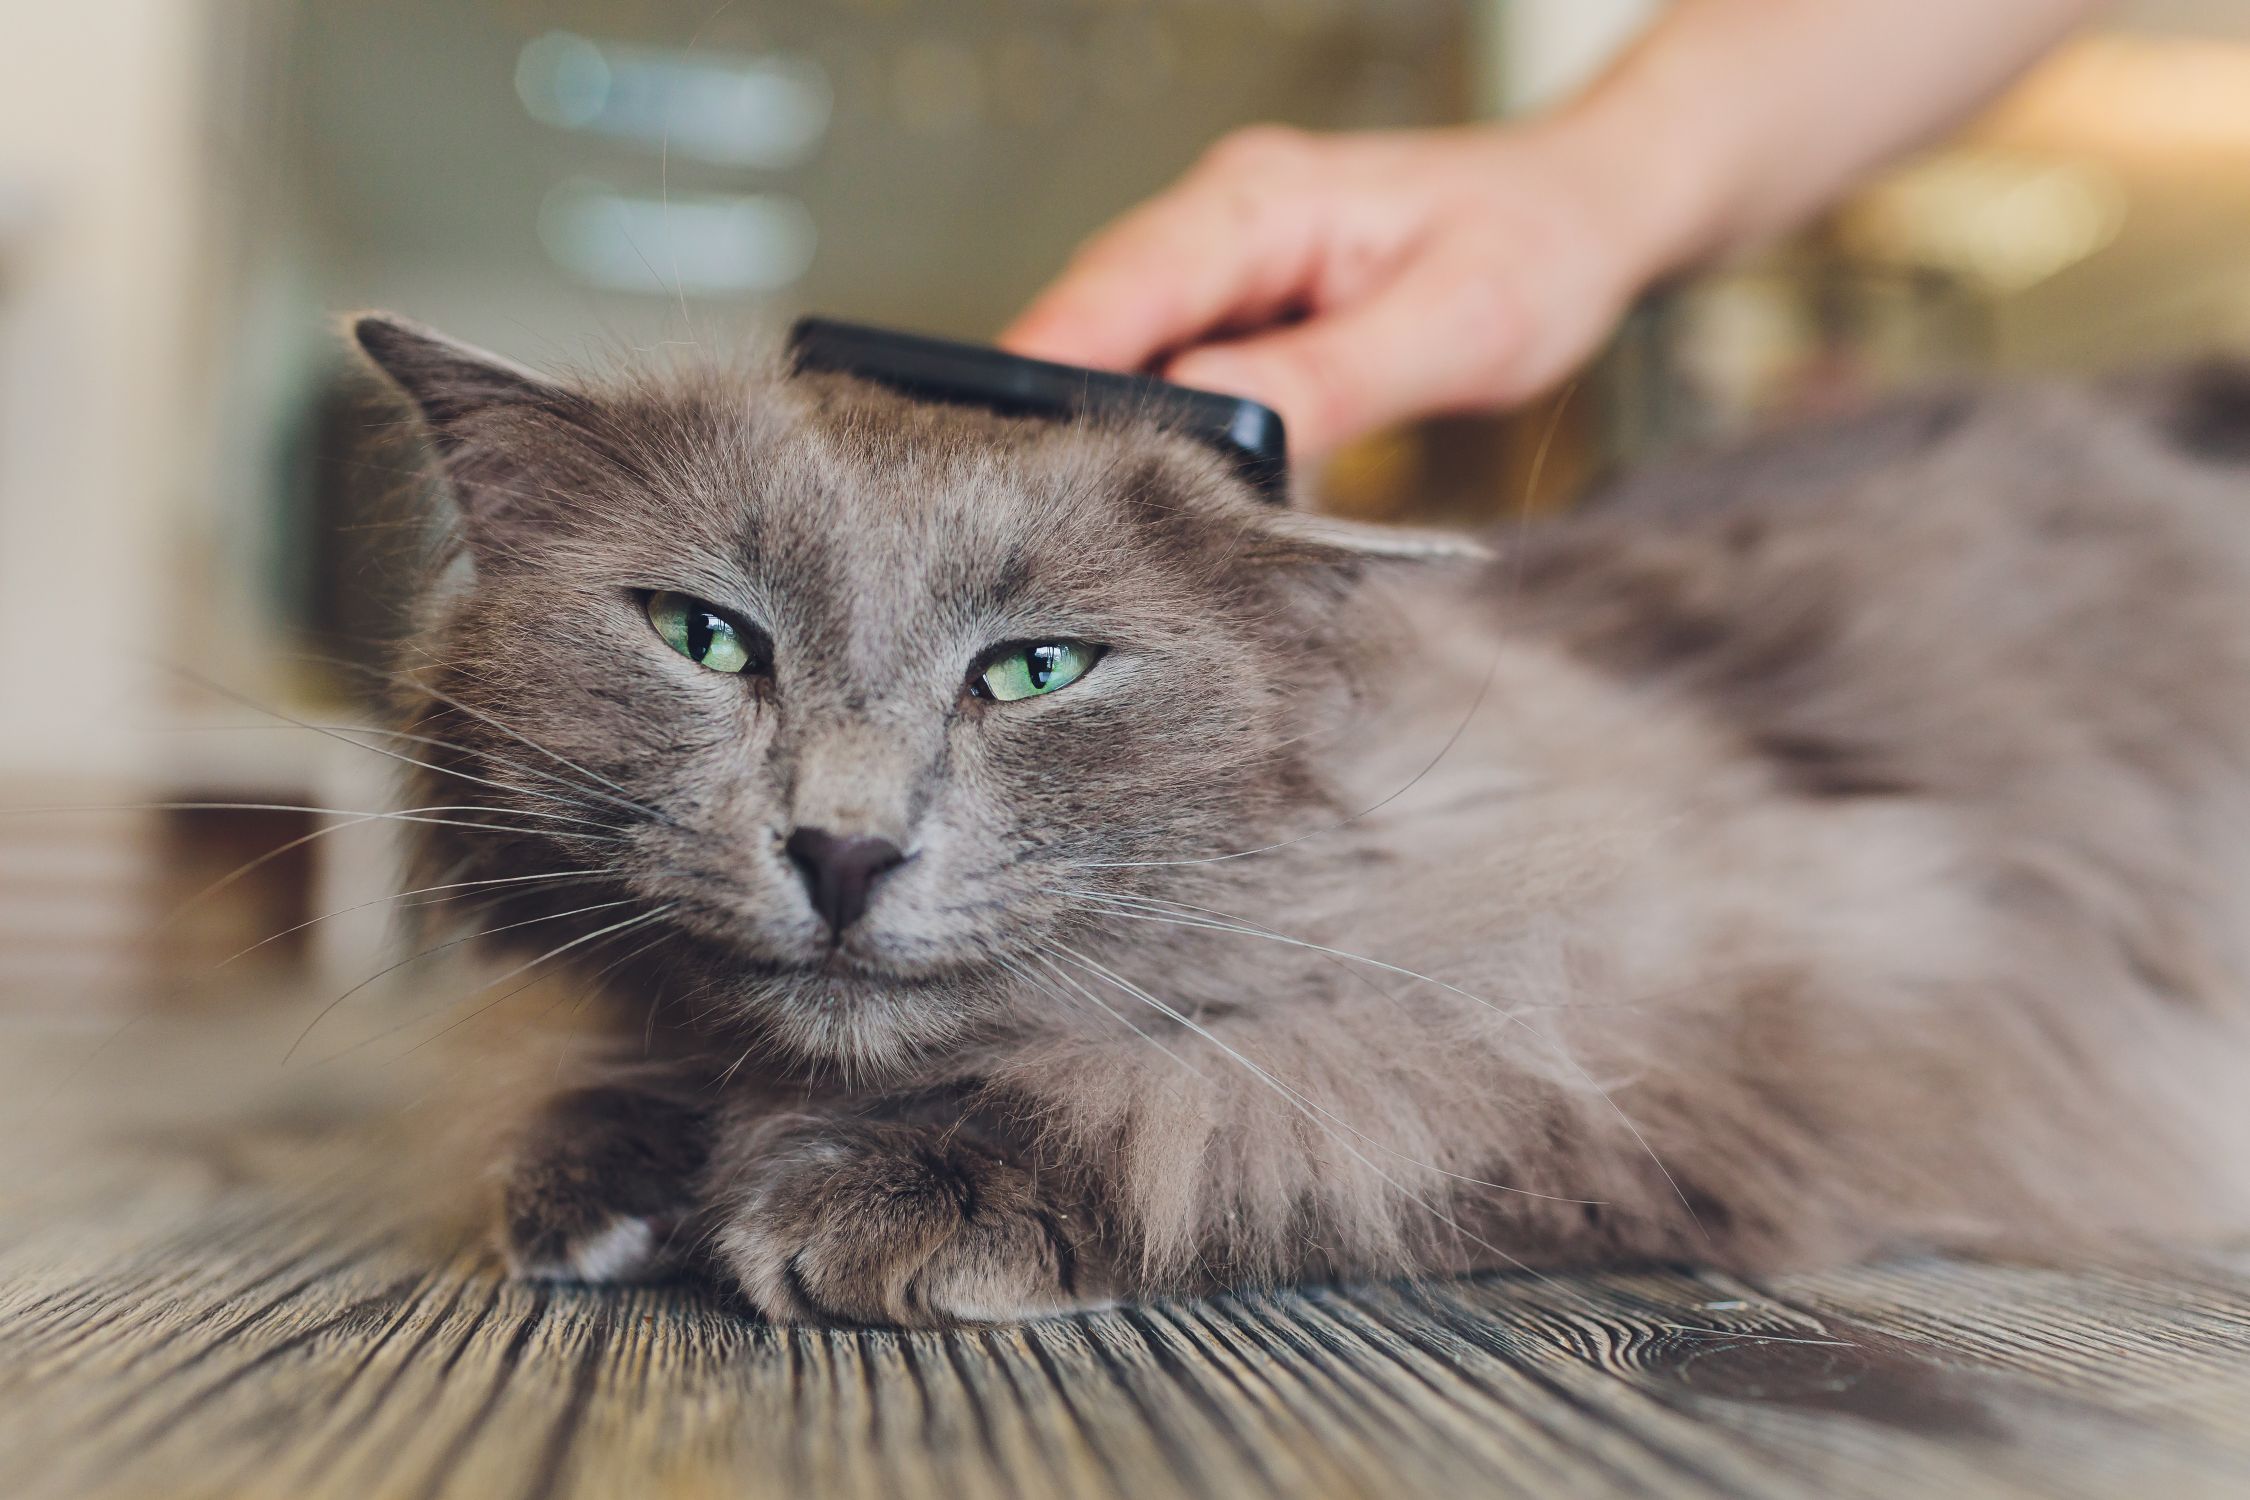 Is Your Cat Shedding Right Now? - Mobile Vet M.D.